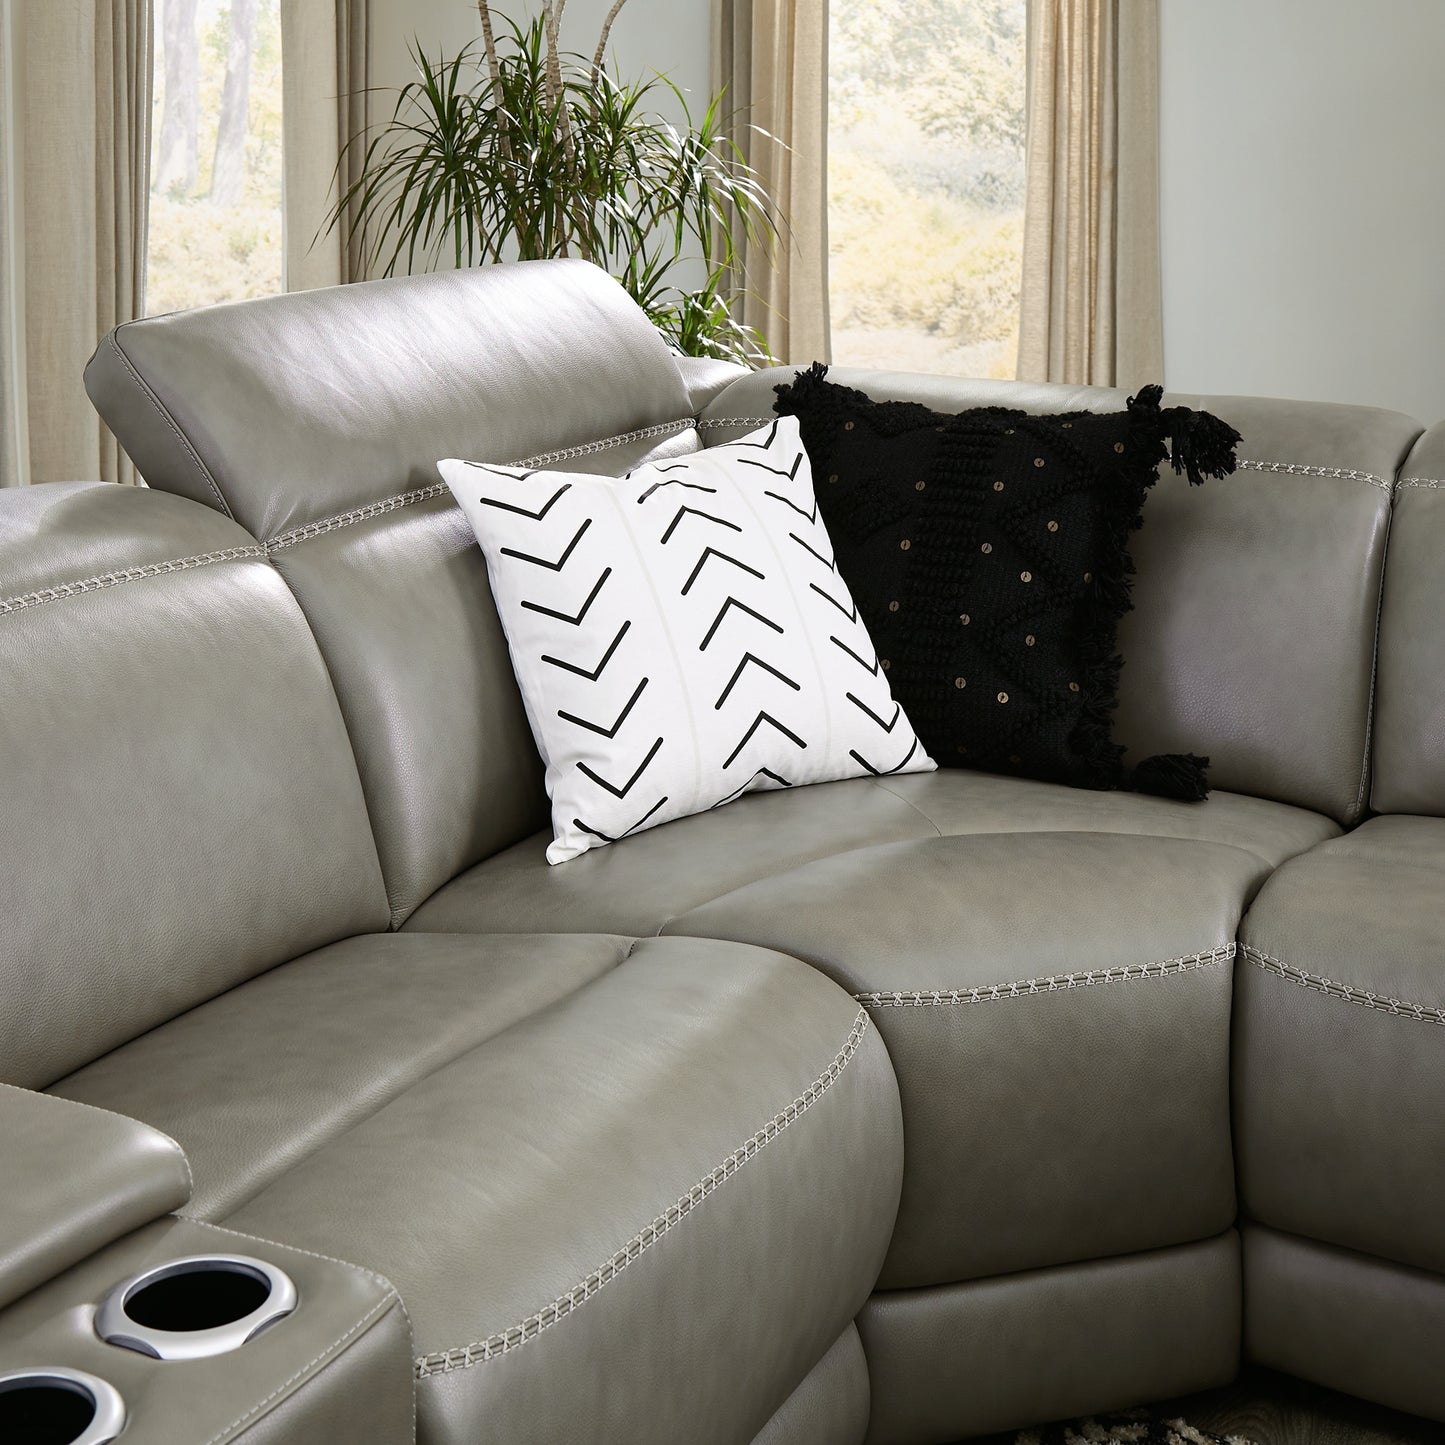 Correze 5-Piece Power Reclining Sectional Signature Design by Ashley®